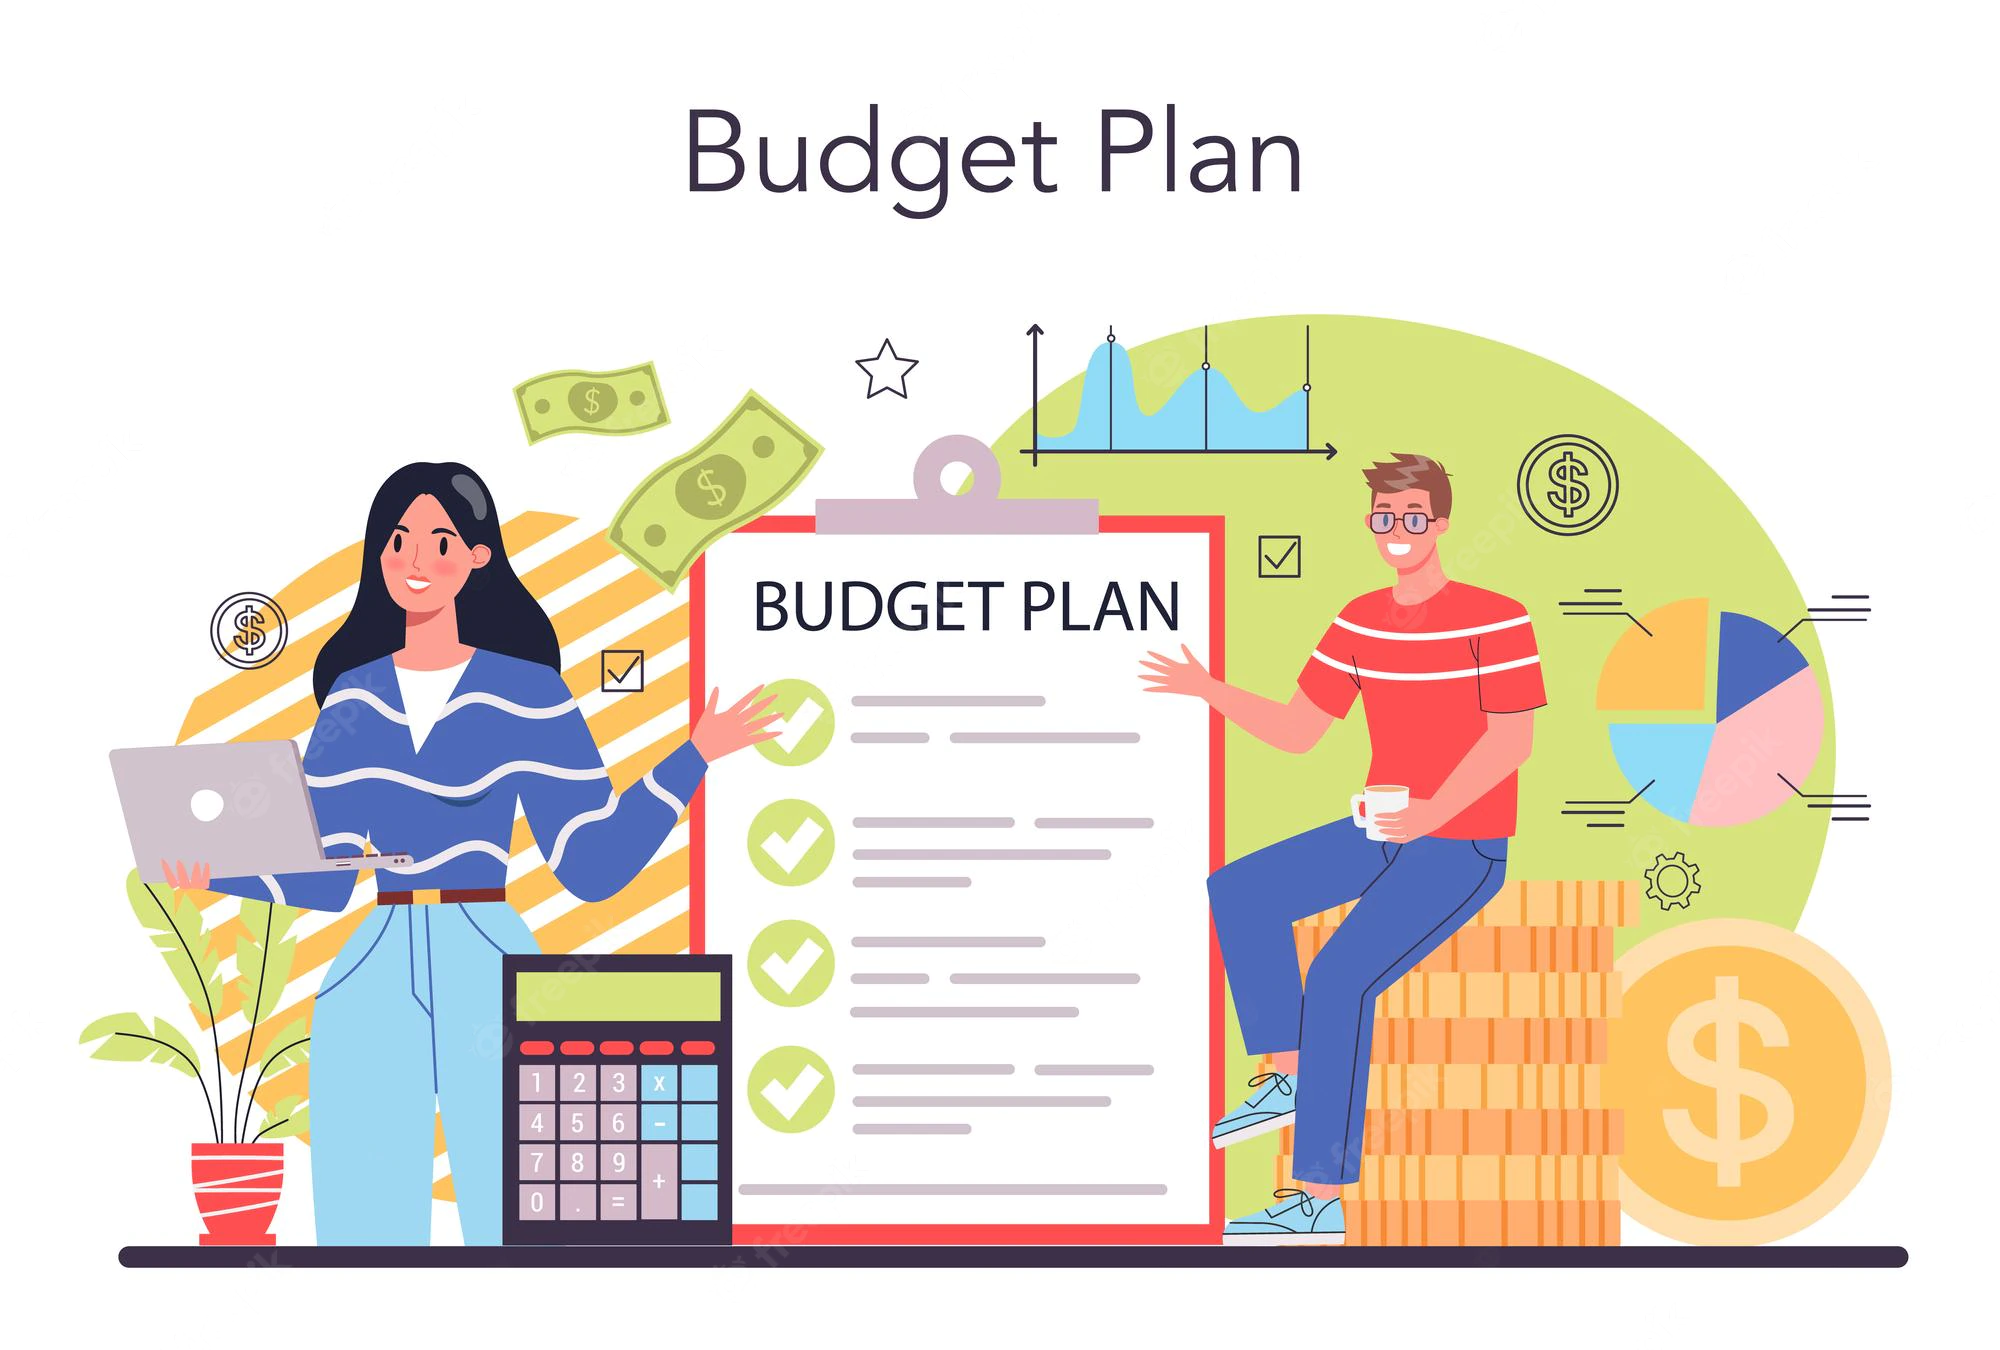 How to create an event budgeting plan?